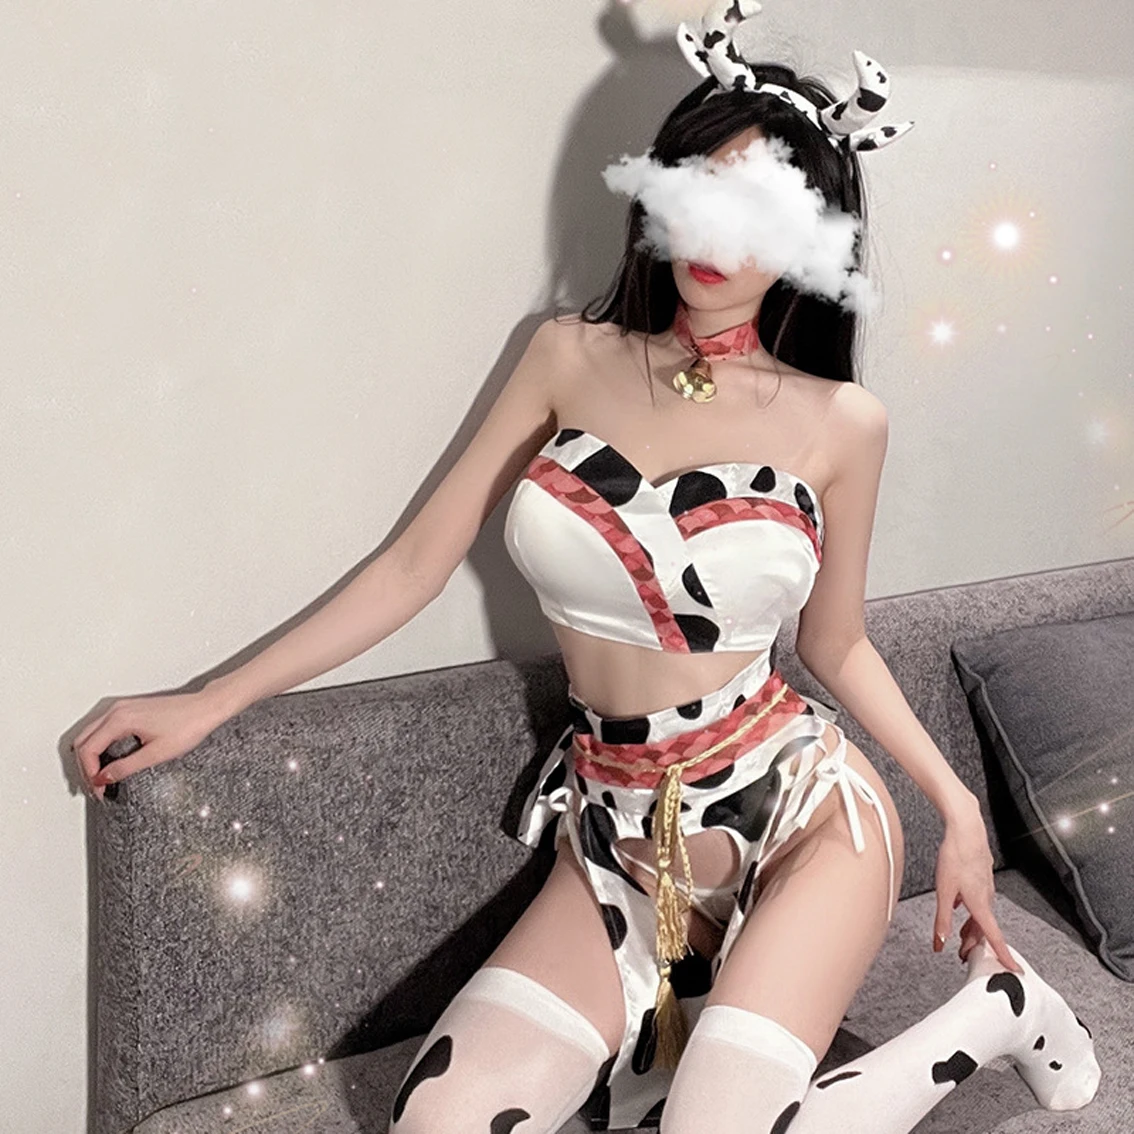 

Dropshipping Women Female Cow Cosplay Costume Exotic Apparel Lingeries Erotic Nightwear Sexy Maid Uniform